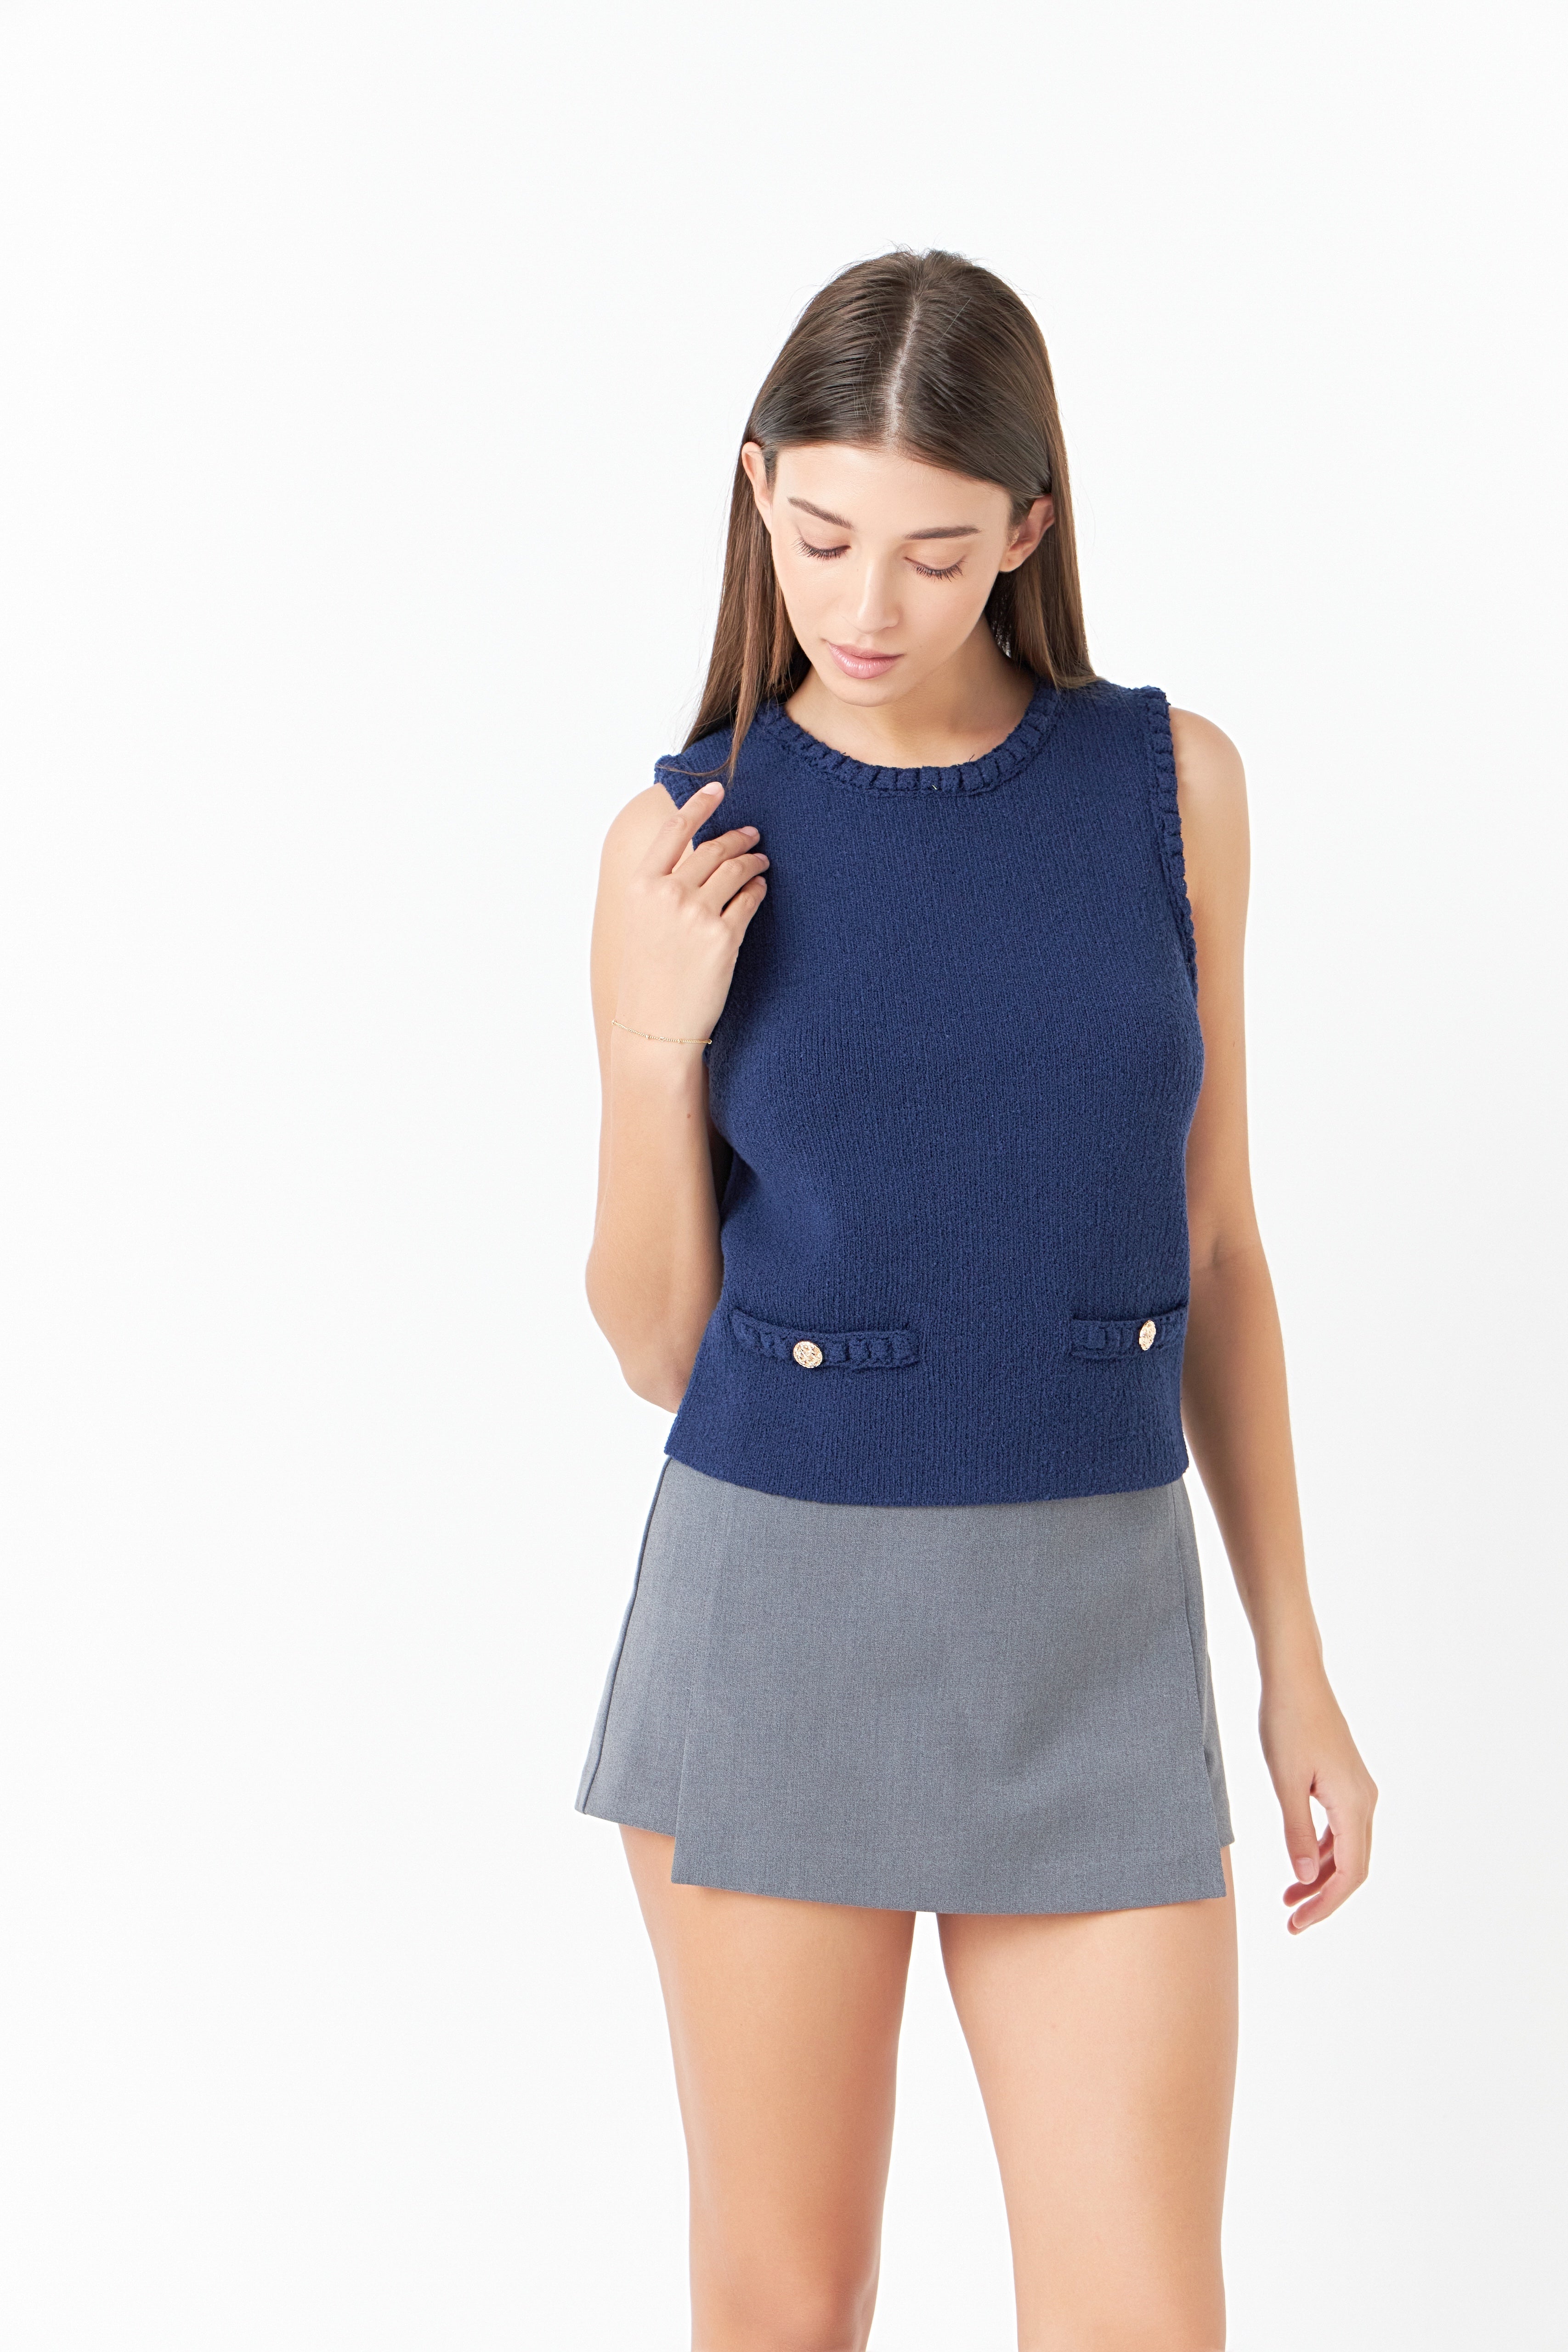 The 'Braided Sleeveless Knit Top'